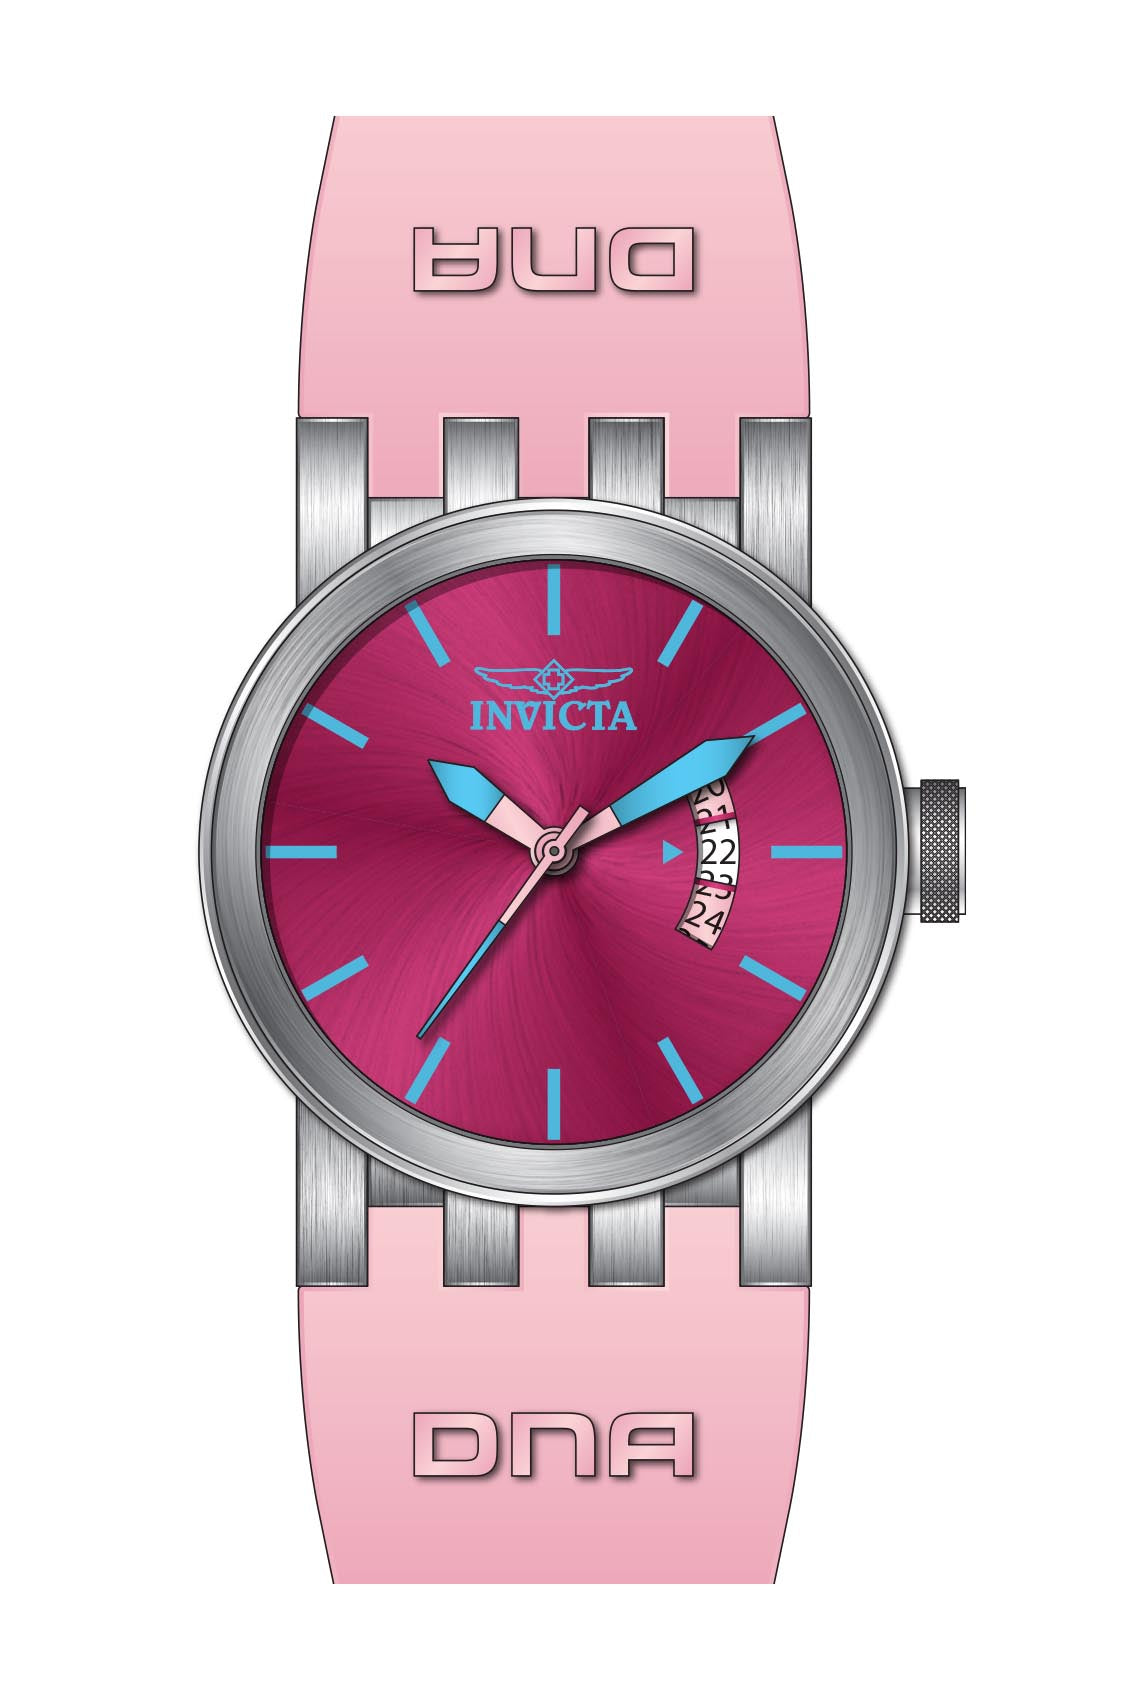 Parts for Invicta DNA Lady 36960